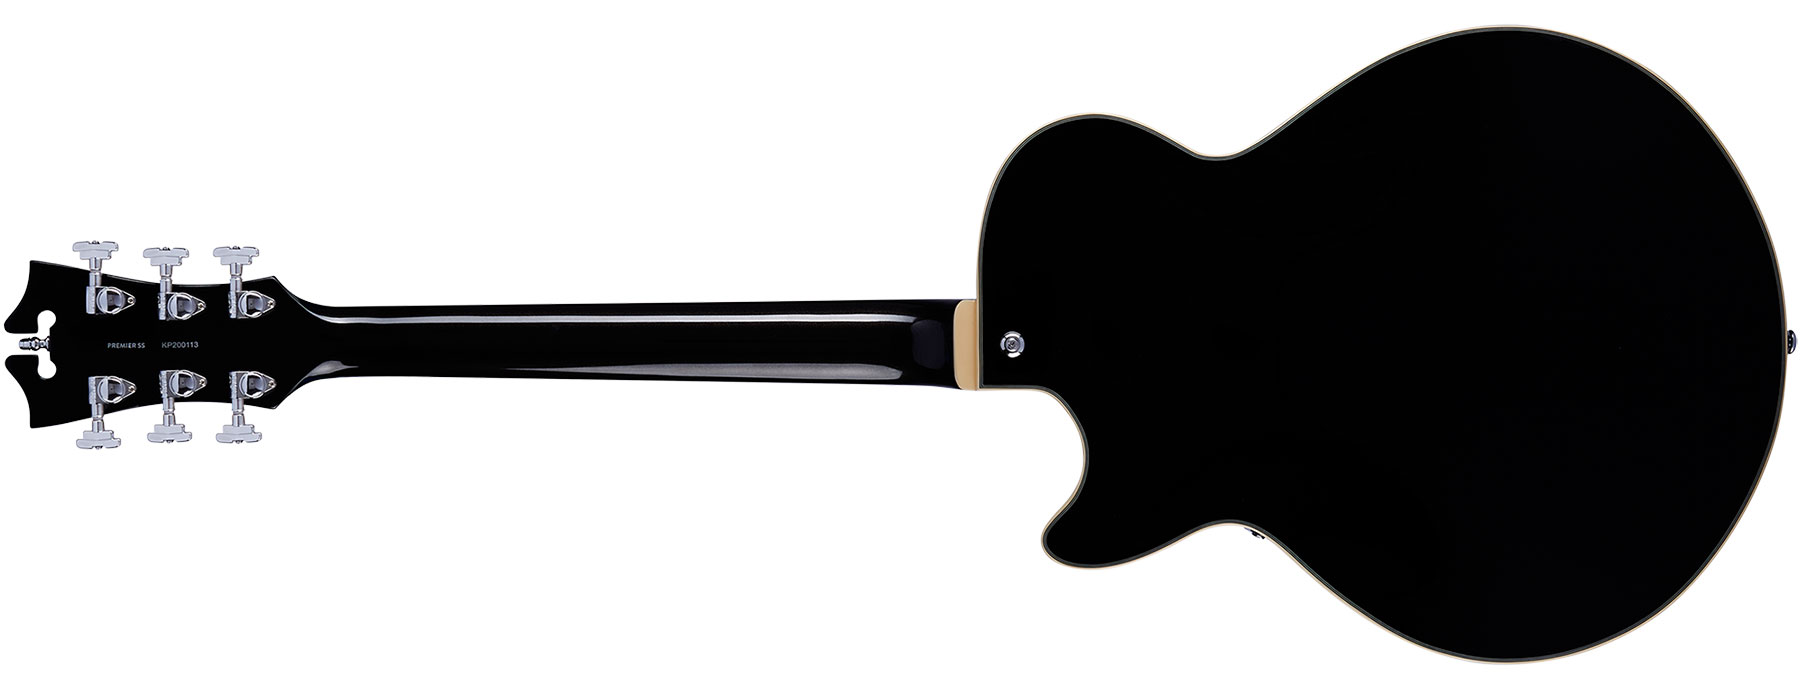 D'angelico Ss Premier 2h Ht Ova - Black Flake - Semi-hollow electric guitar - Variation 2